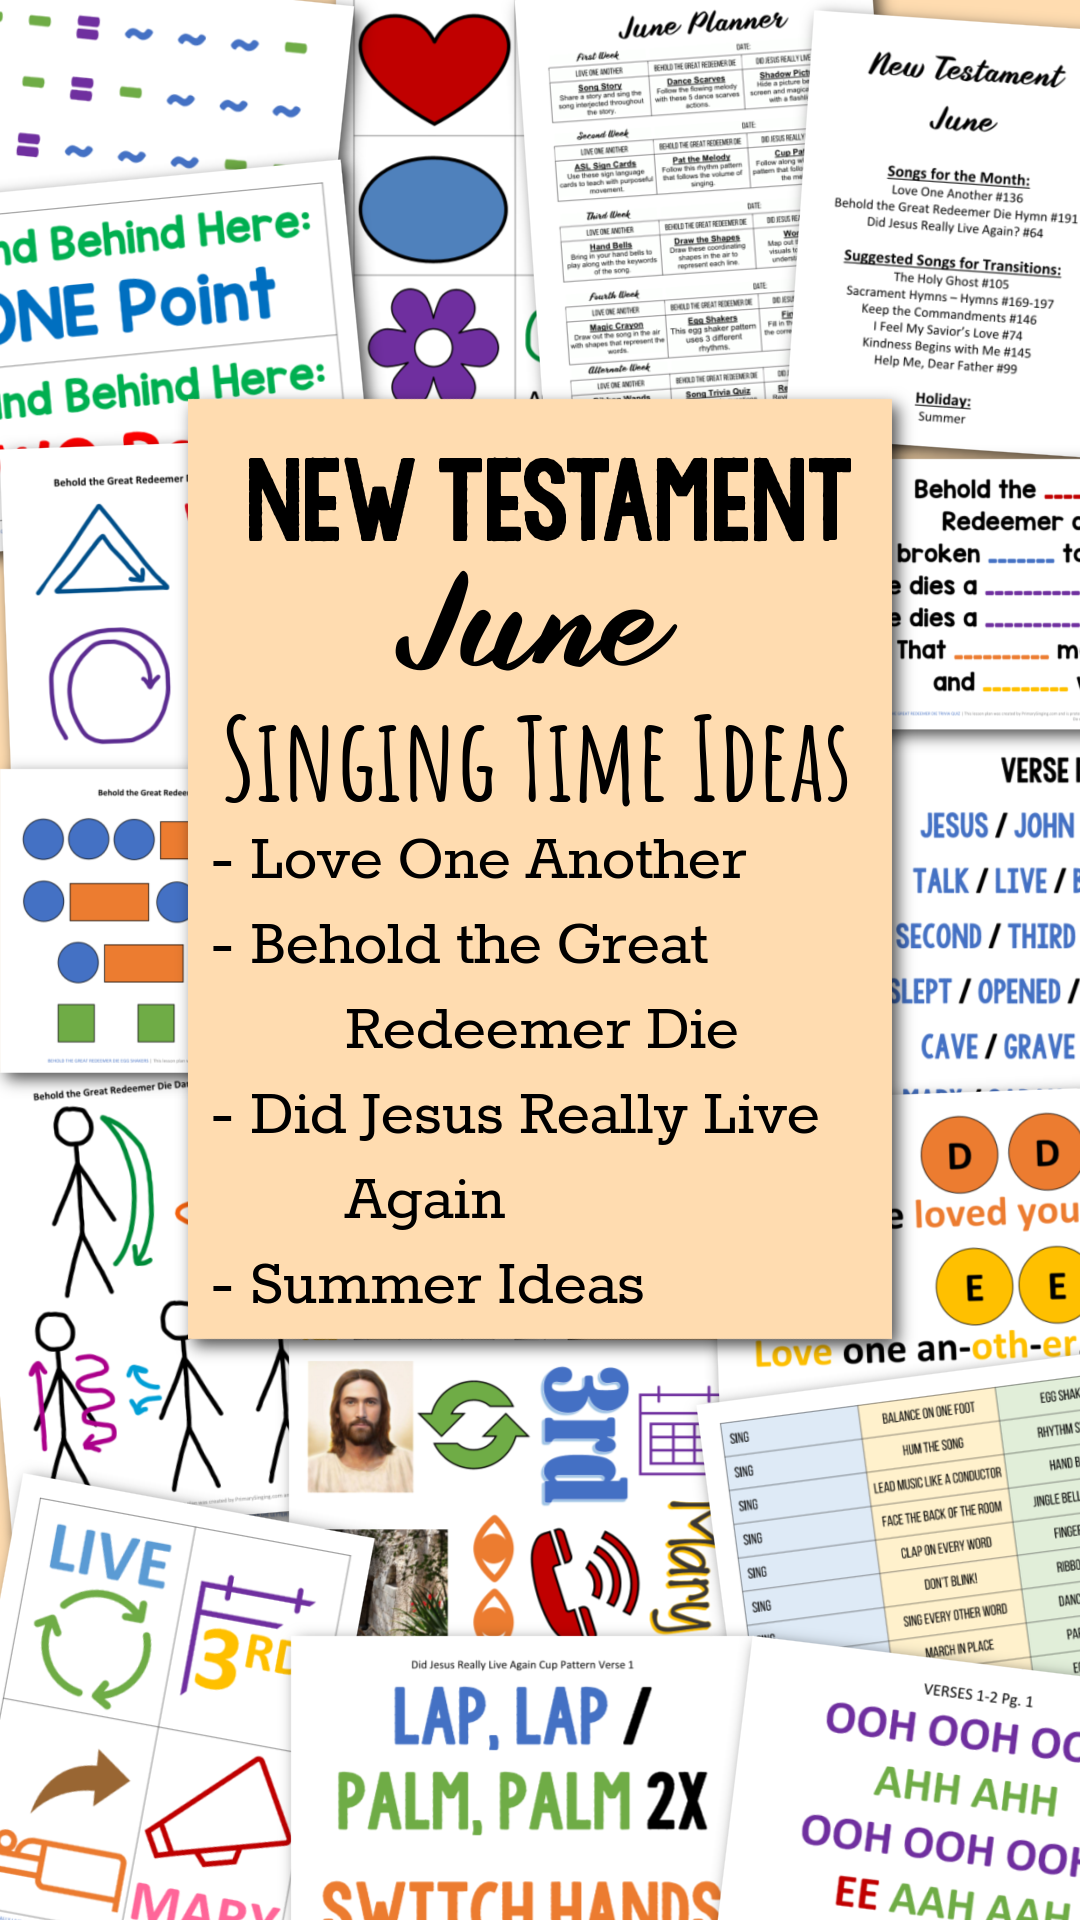 New Testament June Primary Songs List and Singing Time Teaching Packet for Come Follow Me LDS Primary Music Leaders - Includes Love One Another, Behold the Great Redeemer Die, Did Jesus Really Live Again, and summer ideas!